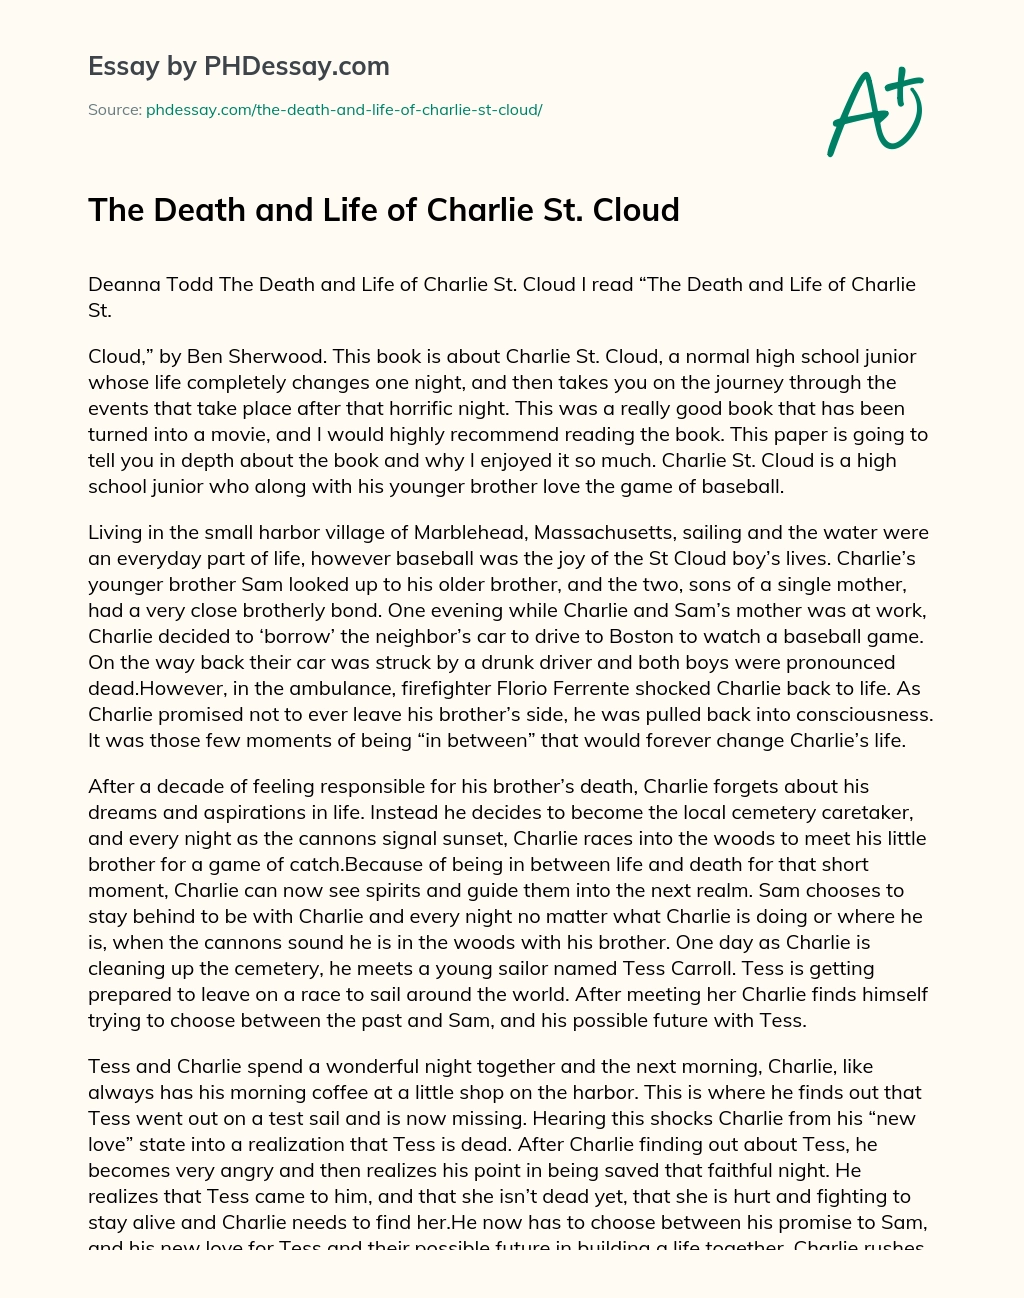 The Death and Life of Charlie St. Cloud essay